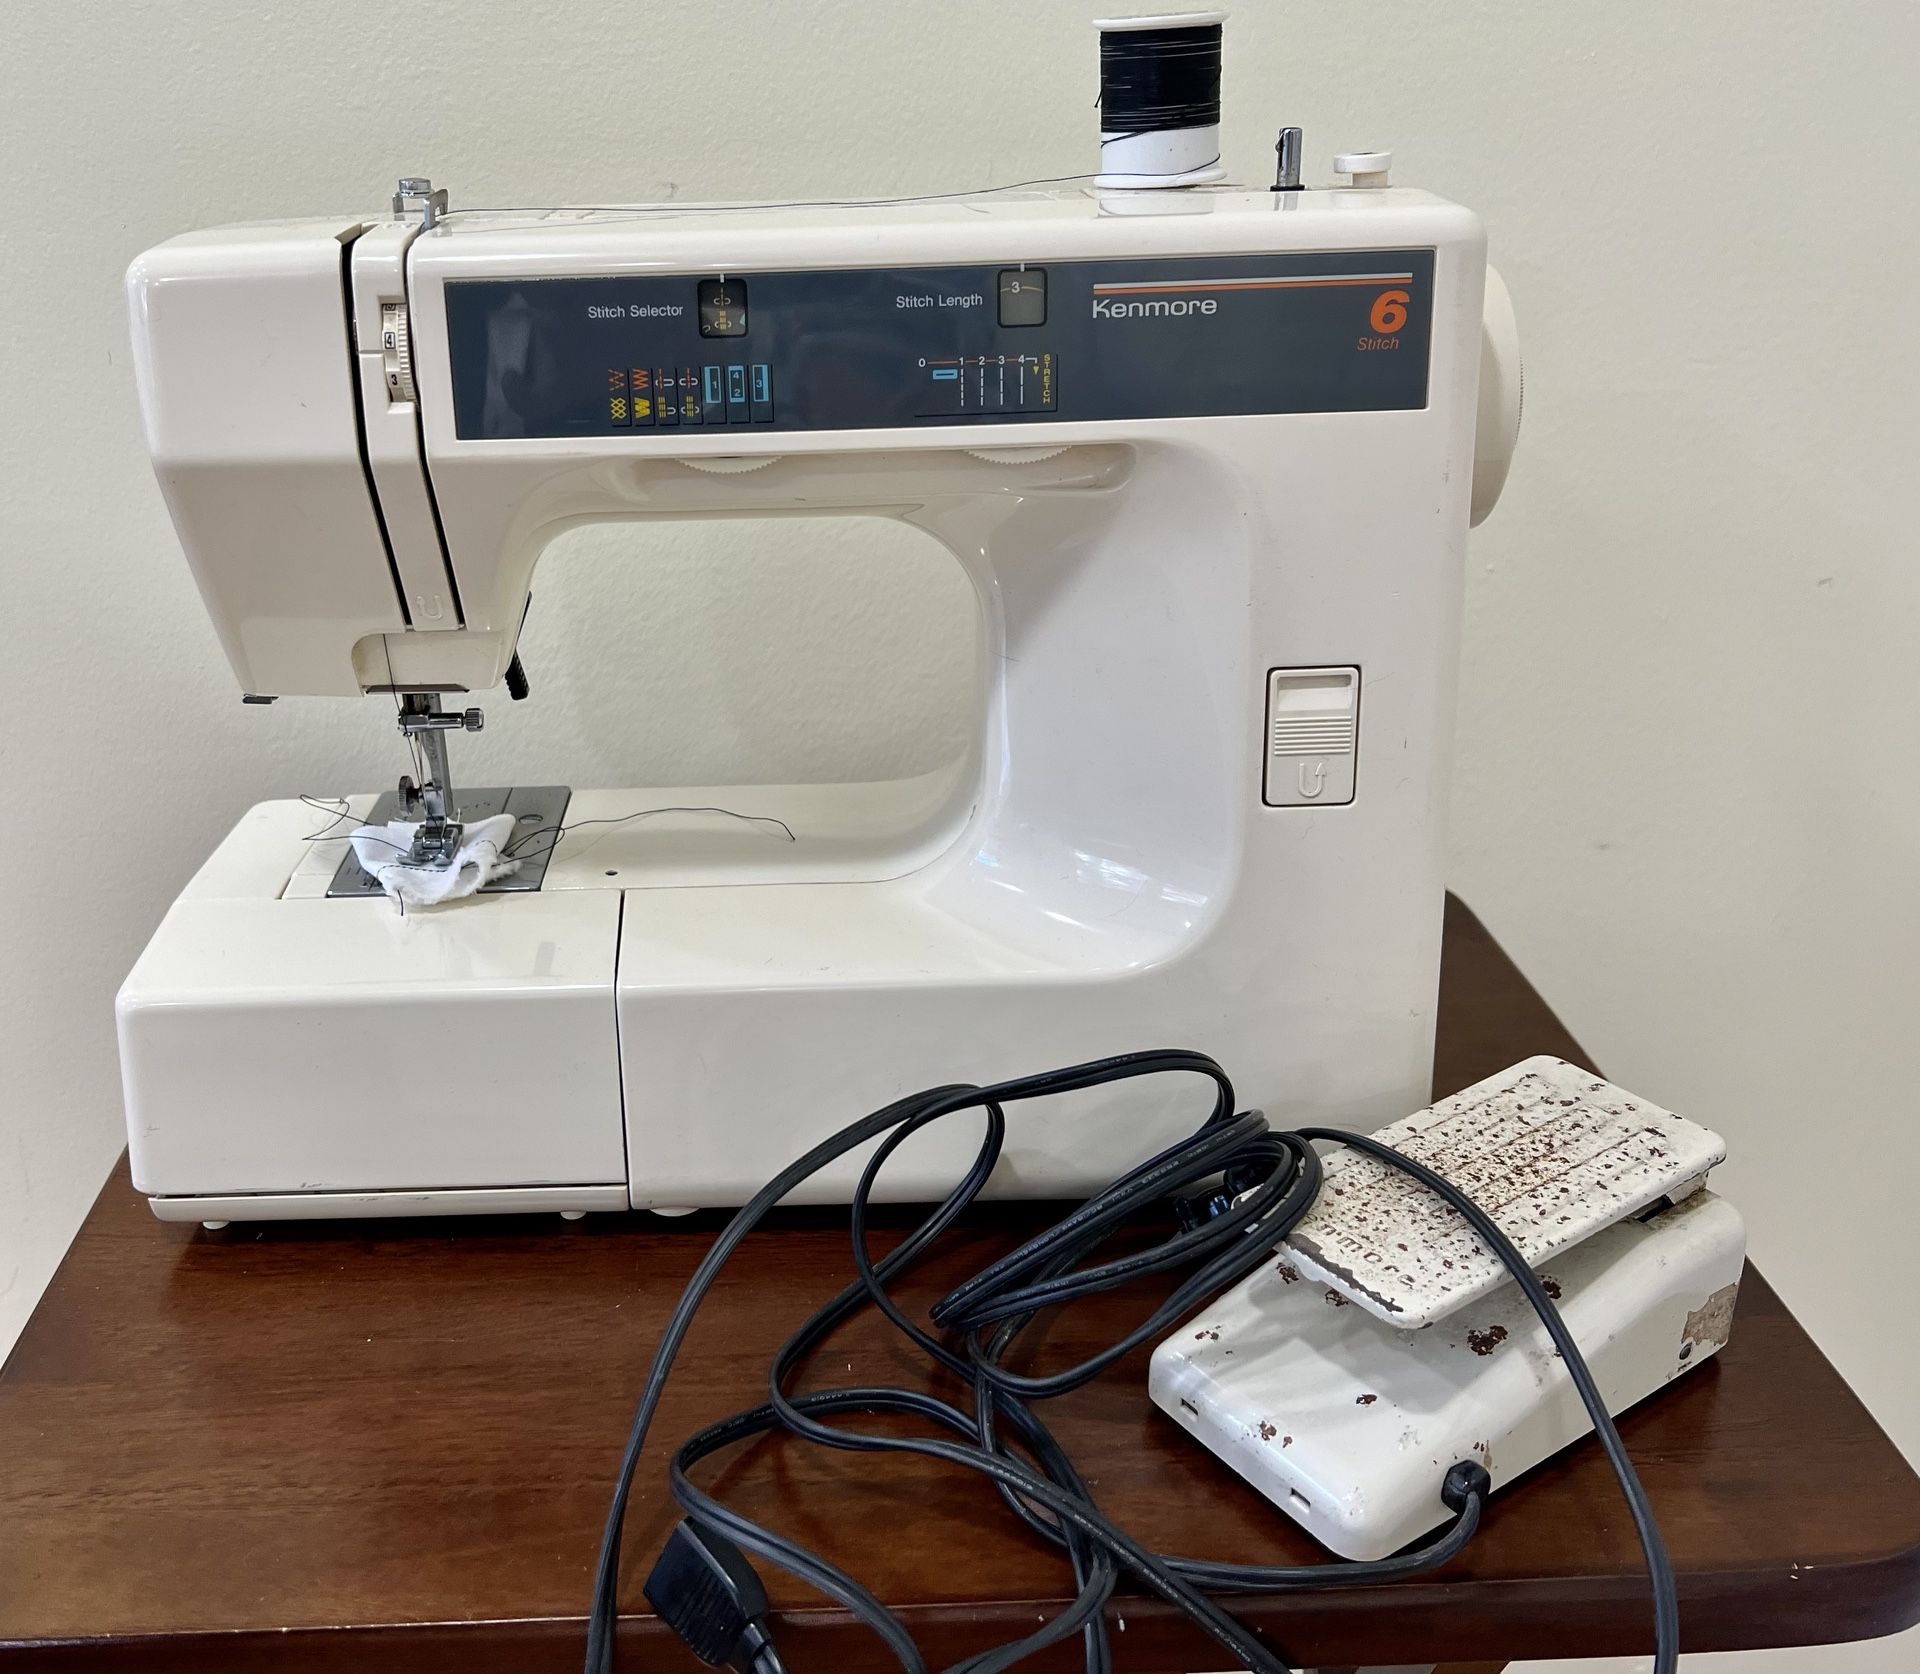 Kenmore 6 Stitch Sewing Machine- Serviced And Working 